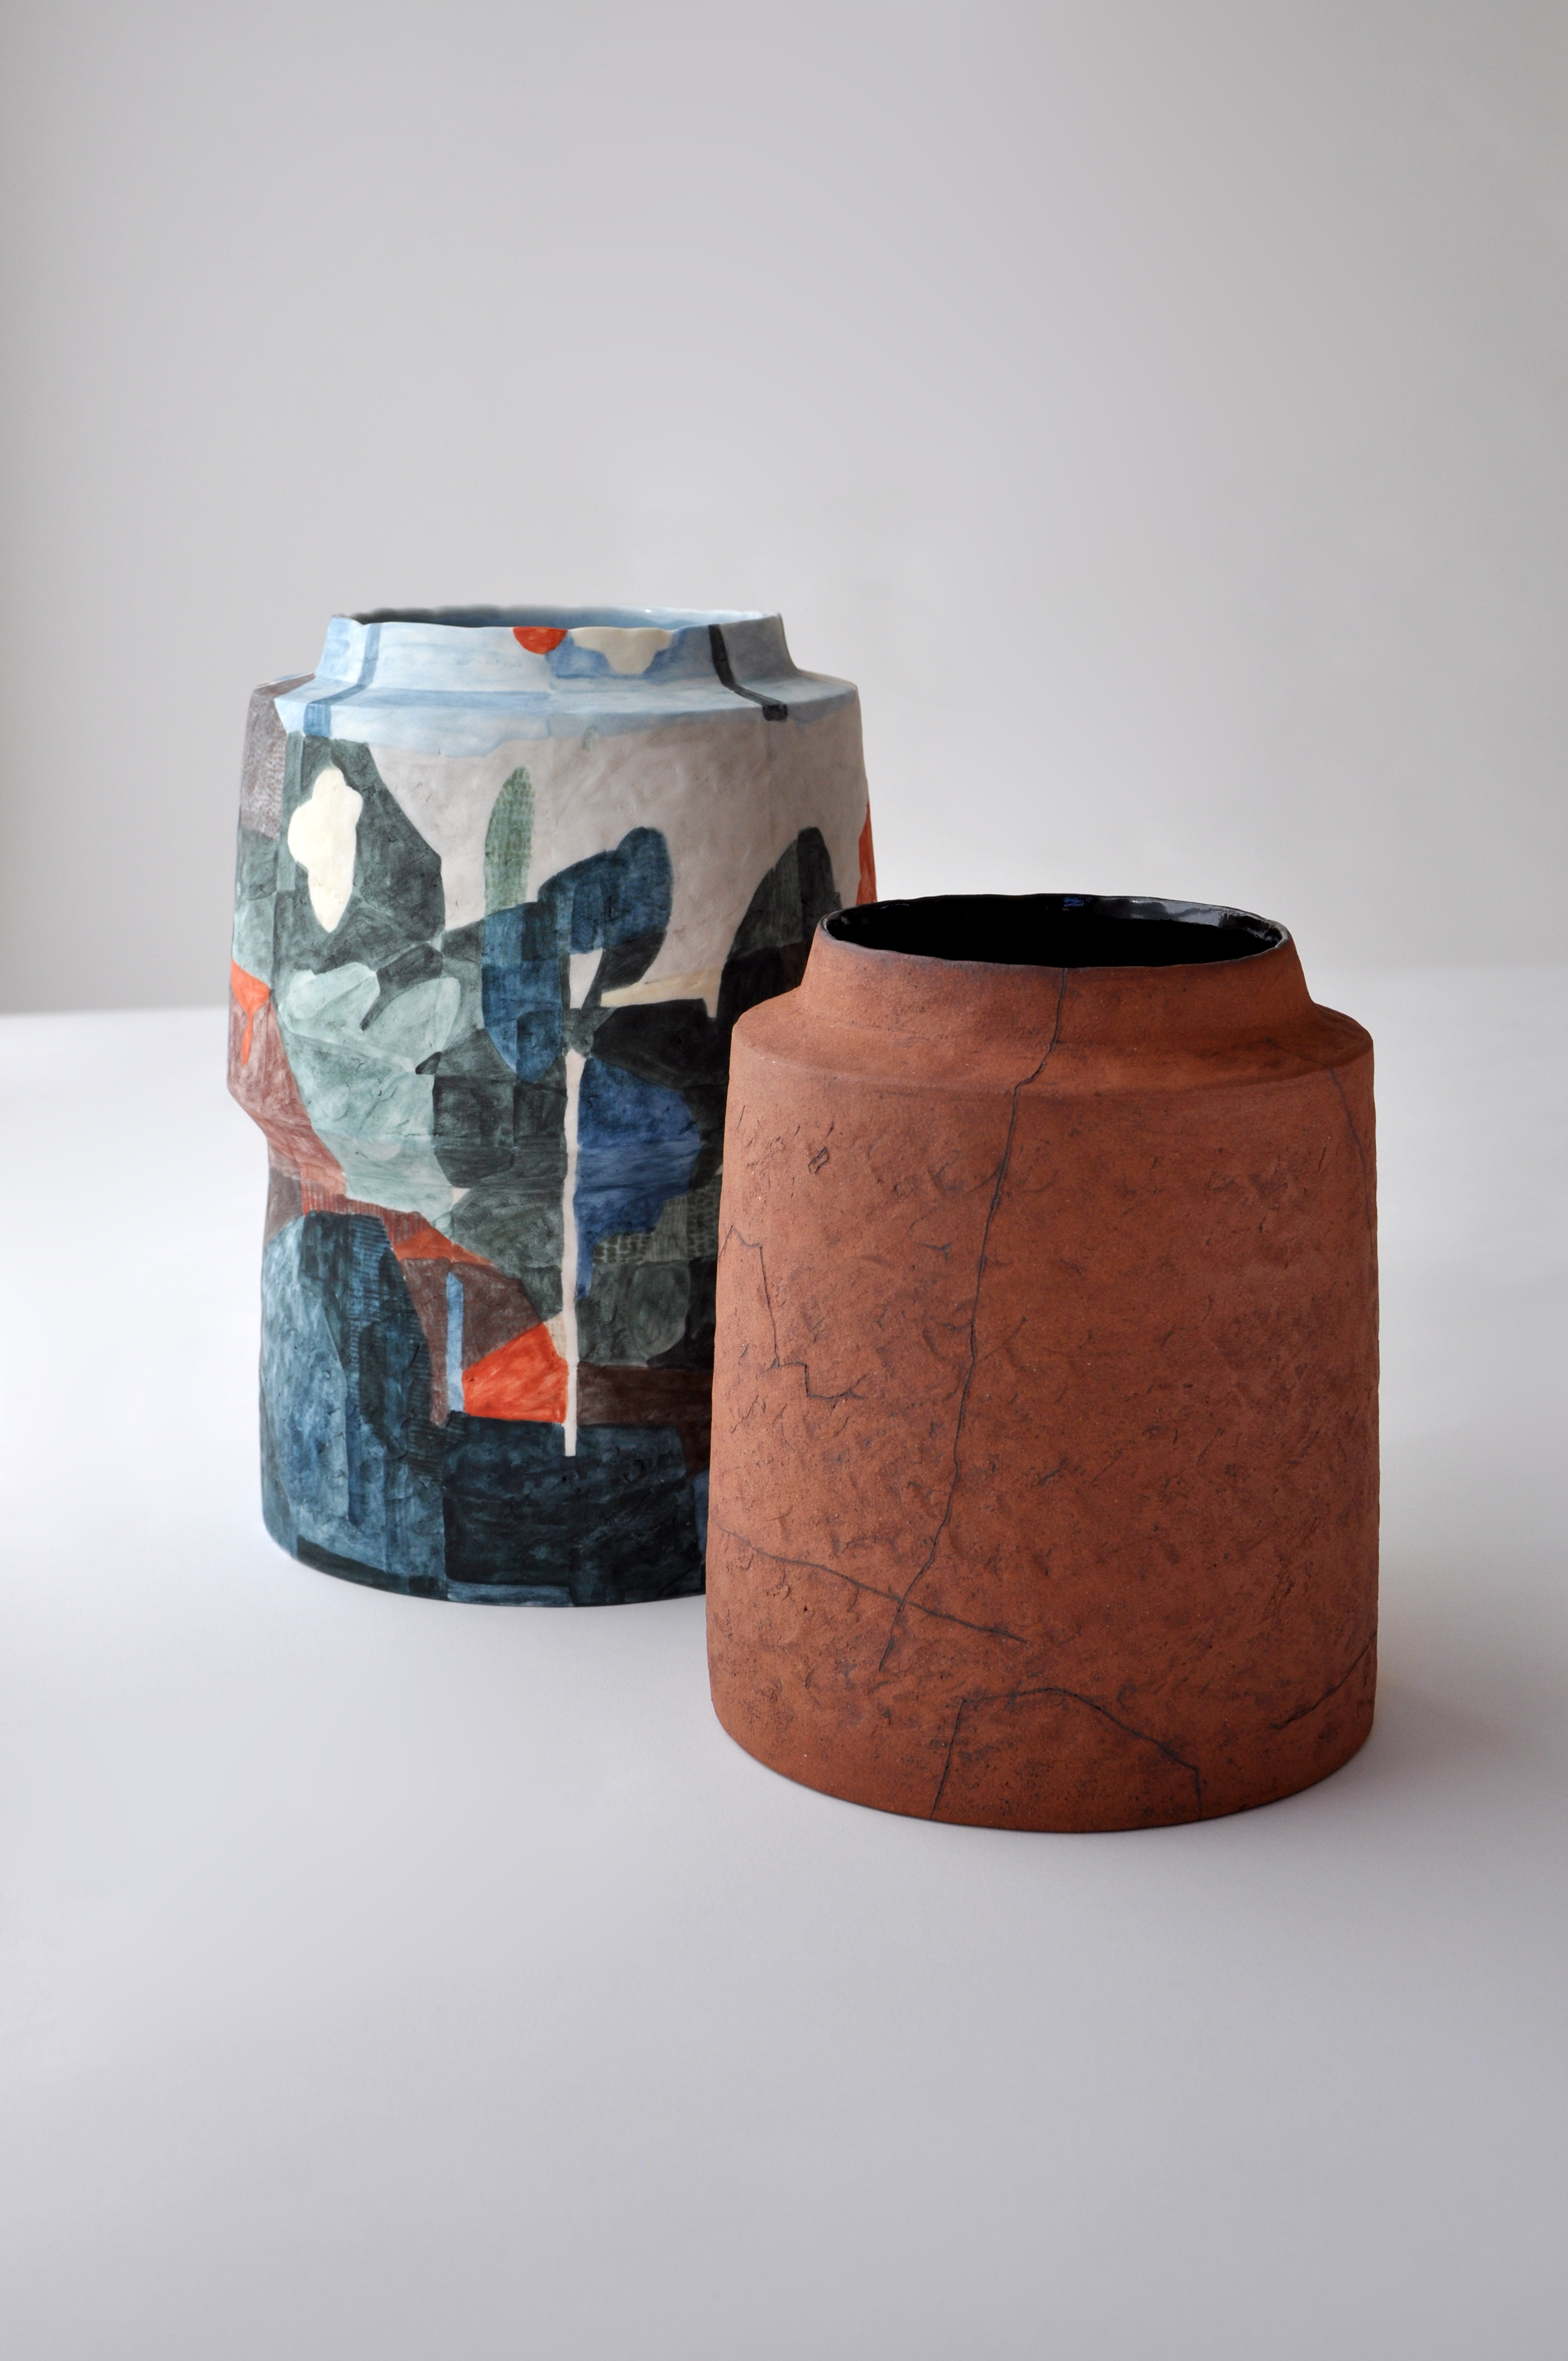 tania rollond_clay intersections vases_2016